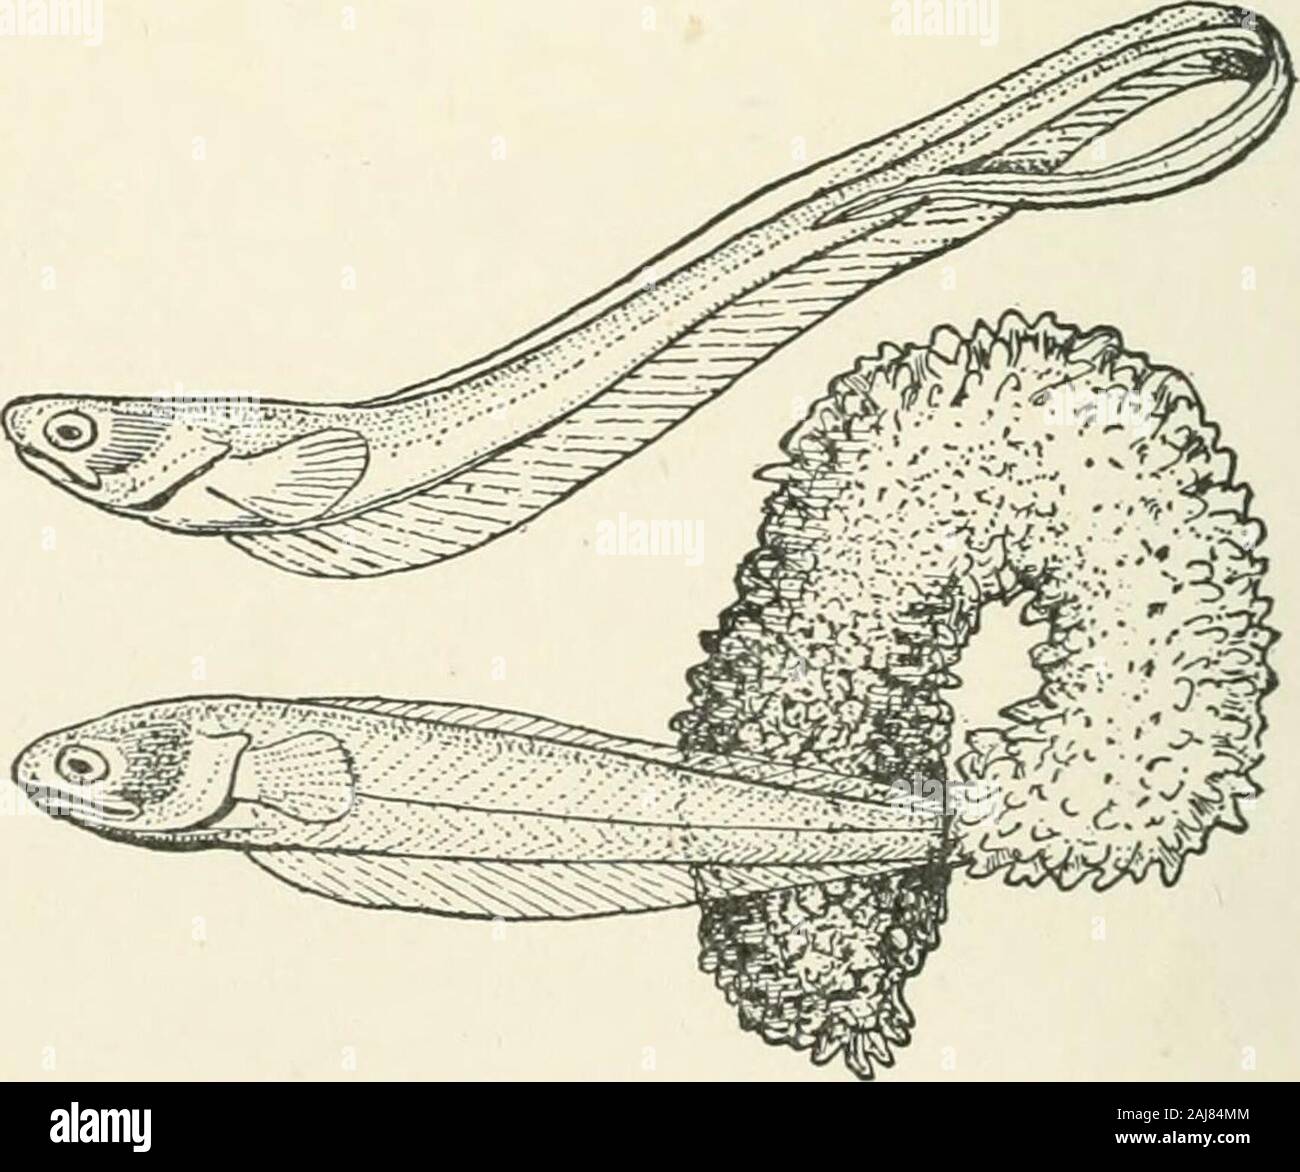 A treatise on zoology . Fig. 410.Notacanthus analis. Gill. (From Jordan and Evermann.) The premaxillae alone enter the margin of the small inferior mouth.The suborbitals and post-temporal have been lost. Notacanthus, Bl. ; depths of the Mediterranean, Atlantic, and Pacific(Fig. 419). Tribe 2. Scaleless fish, with the anus near the head ; a situation which maybe related to their habit of living iiiside other animals, such as Bivalvesand Holothurians.. Fig. 420. Fierasfer acus, Kaup ; one specimen emerging from a liolothuriau.(After Emery, from Dean.) NOTACANTHIFORMES 419 Family Fierasferidae. T Stock Photo